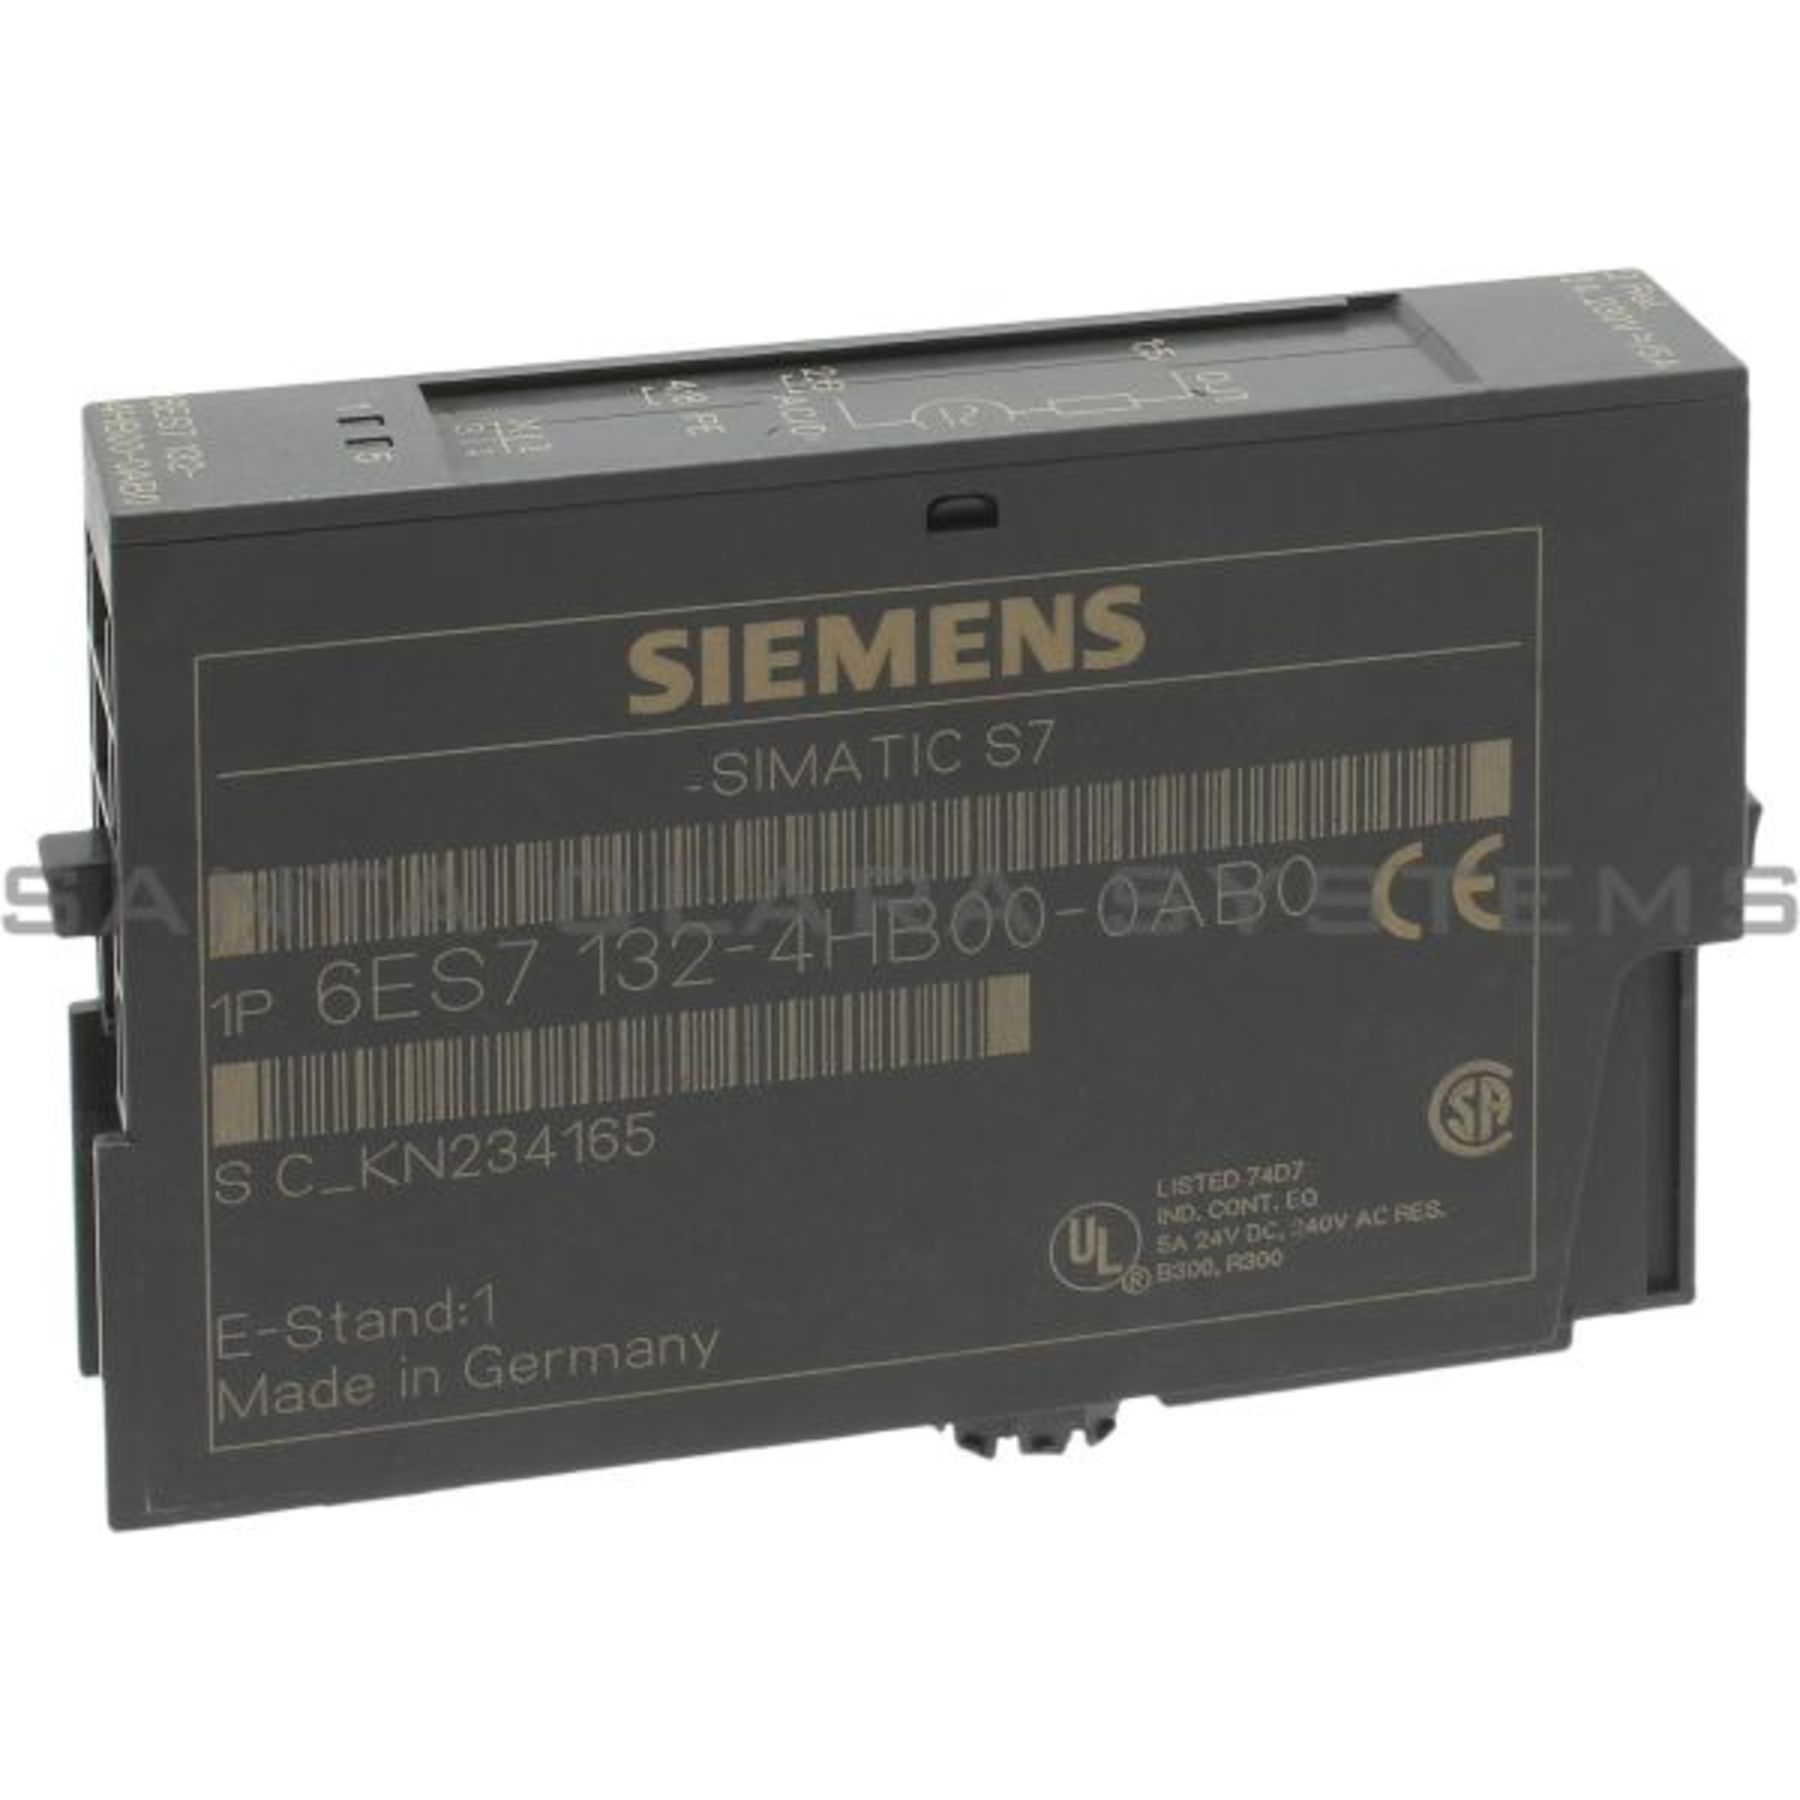 6ES7132-4HB00-0AB0 Siemens In stock and ready to ship - Santa